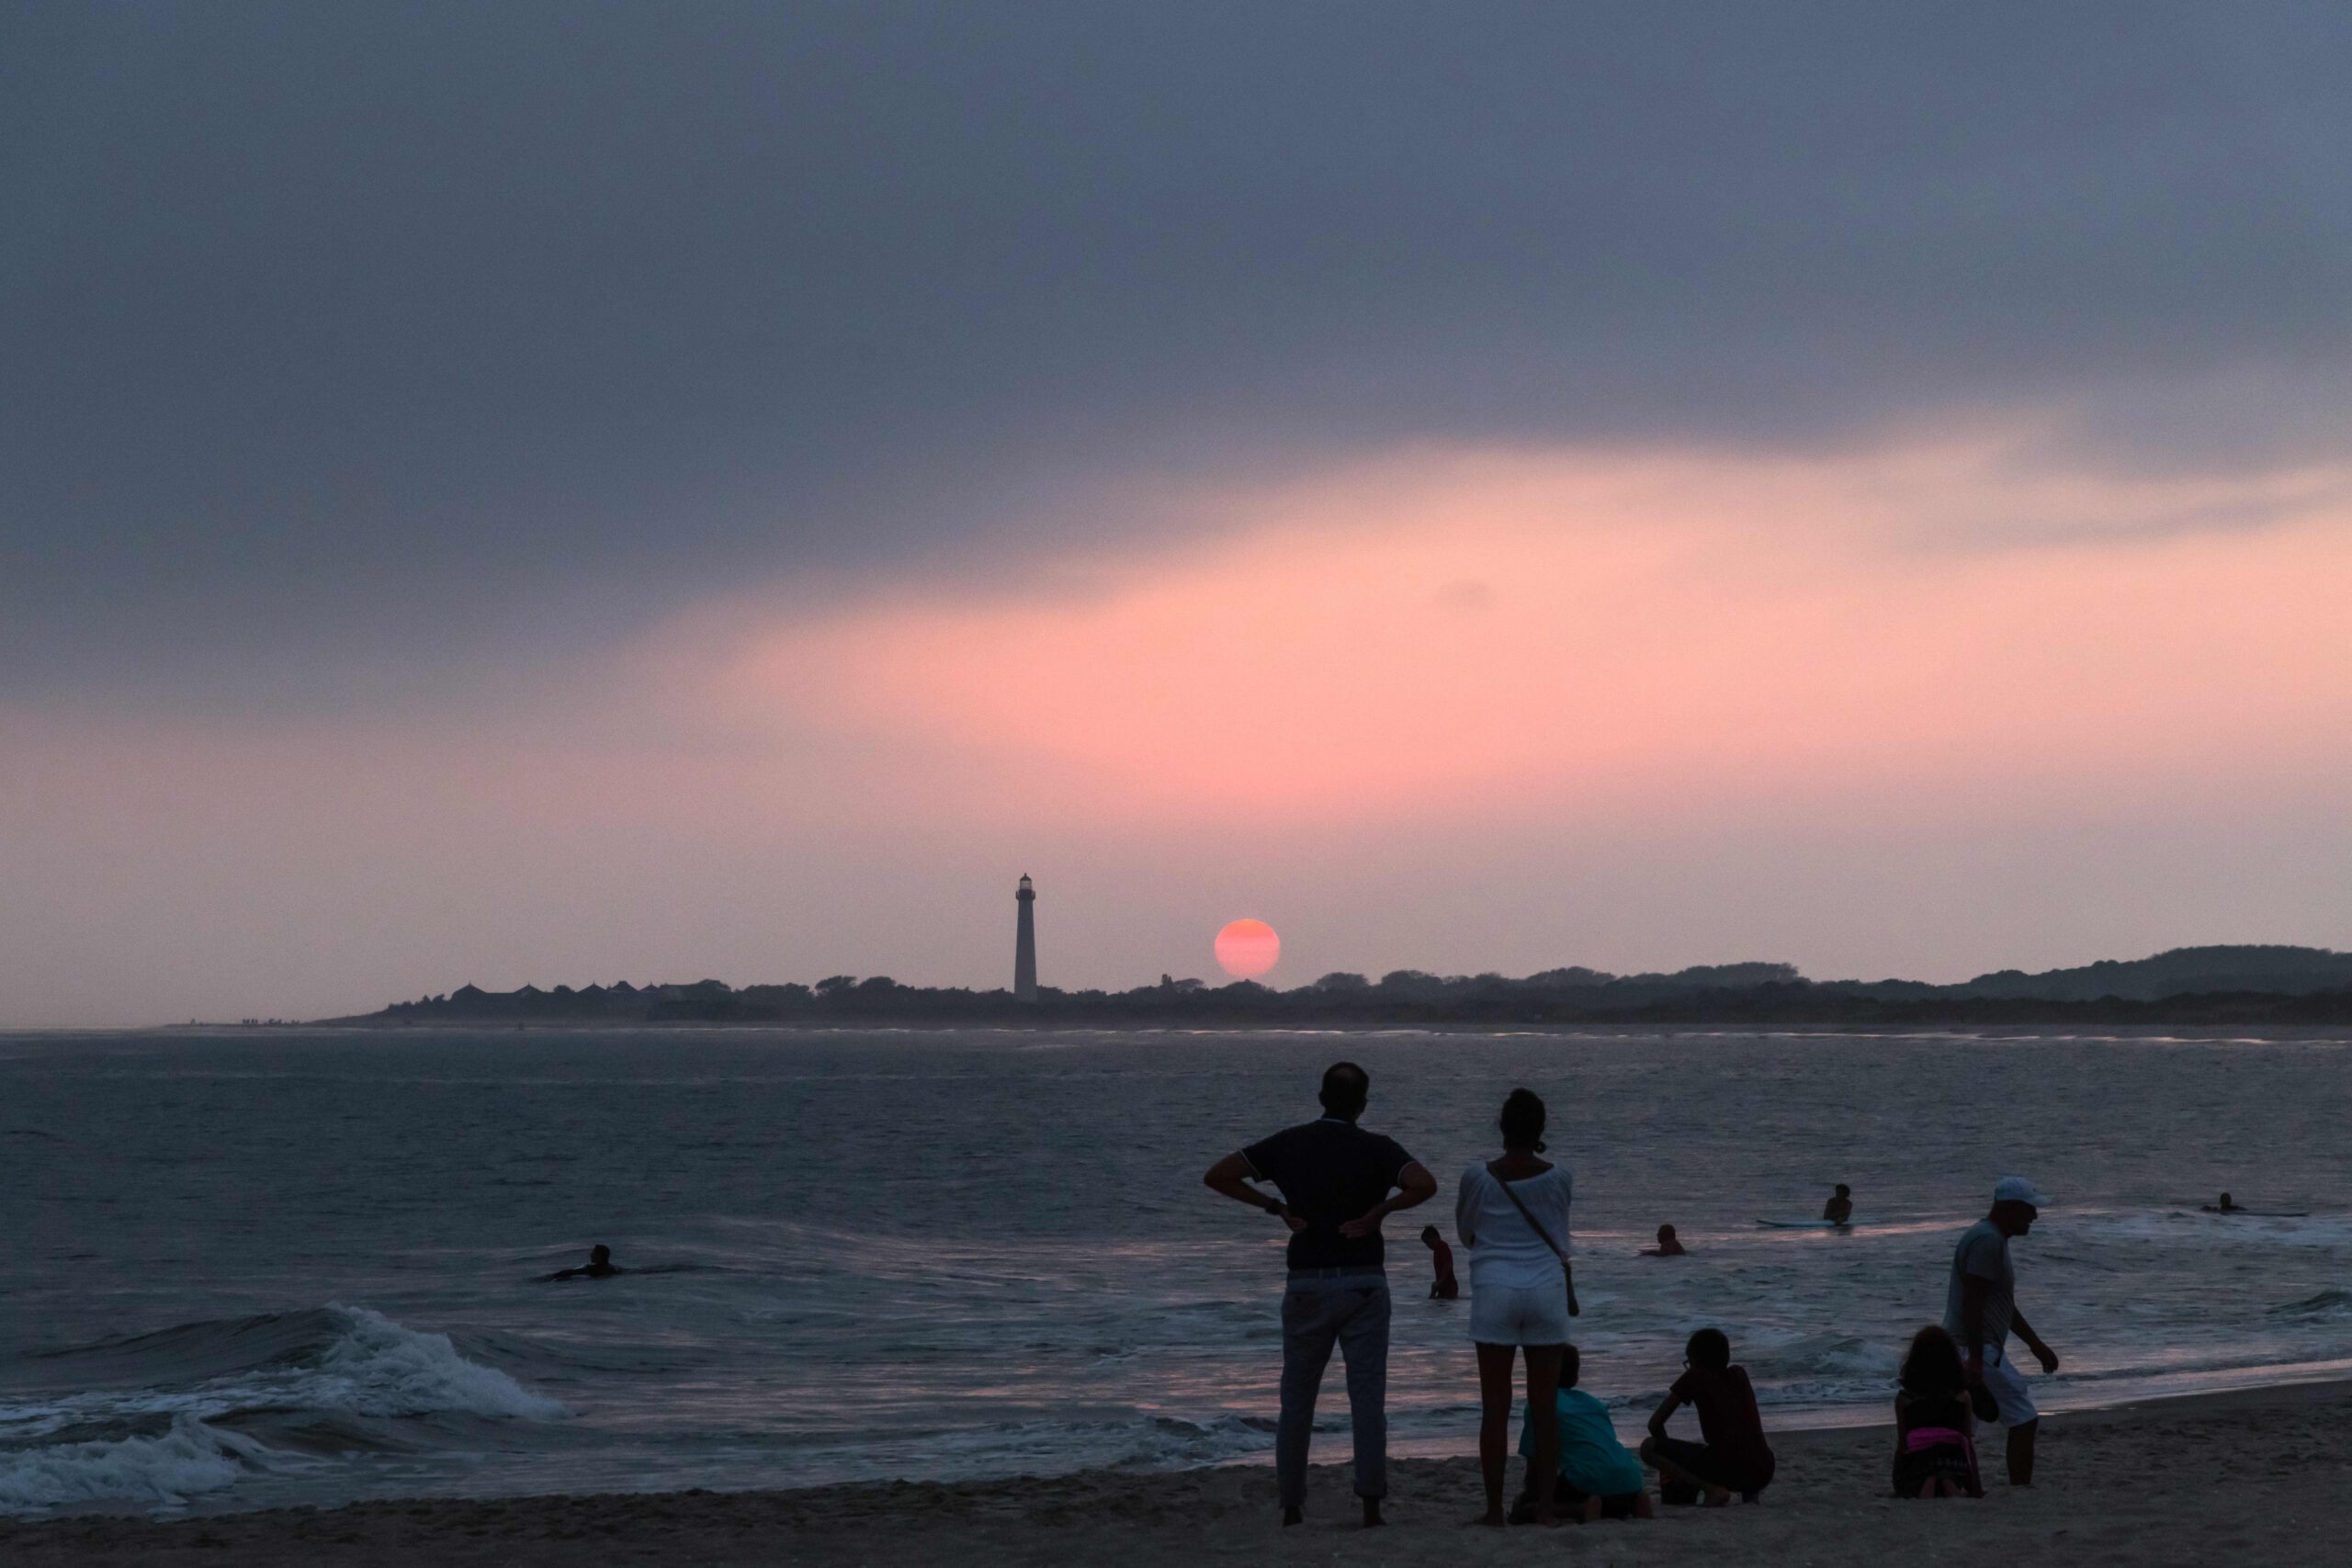 People on the beach and swimming in the ocean watching a pink sunset with a dark cloud in the sky